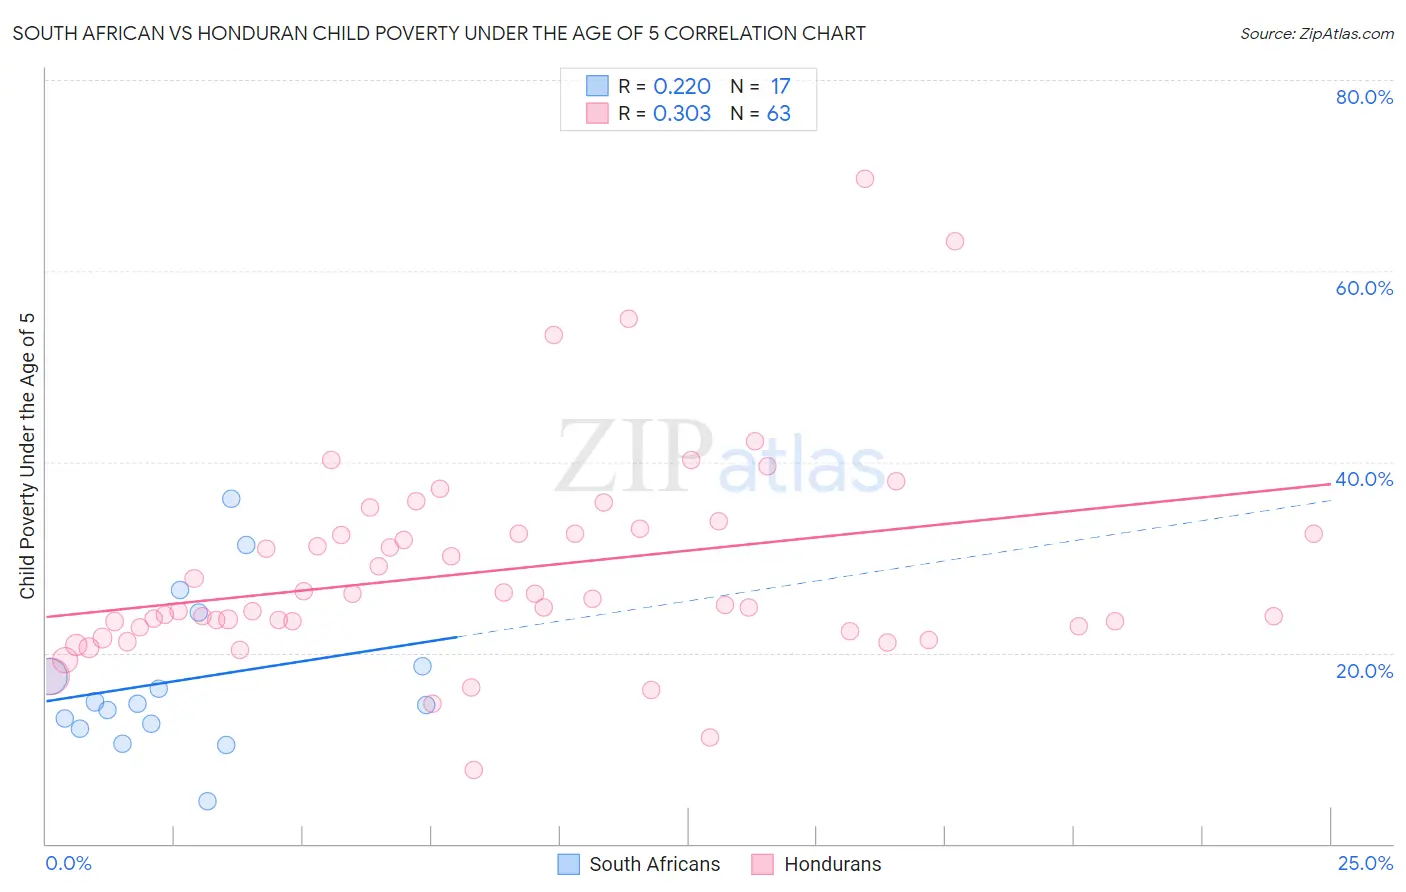 South African vs Honduran Child Poverty Under the Age of 5